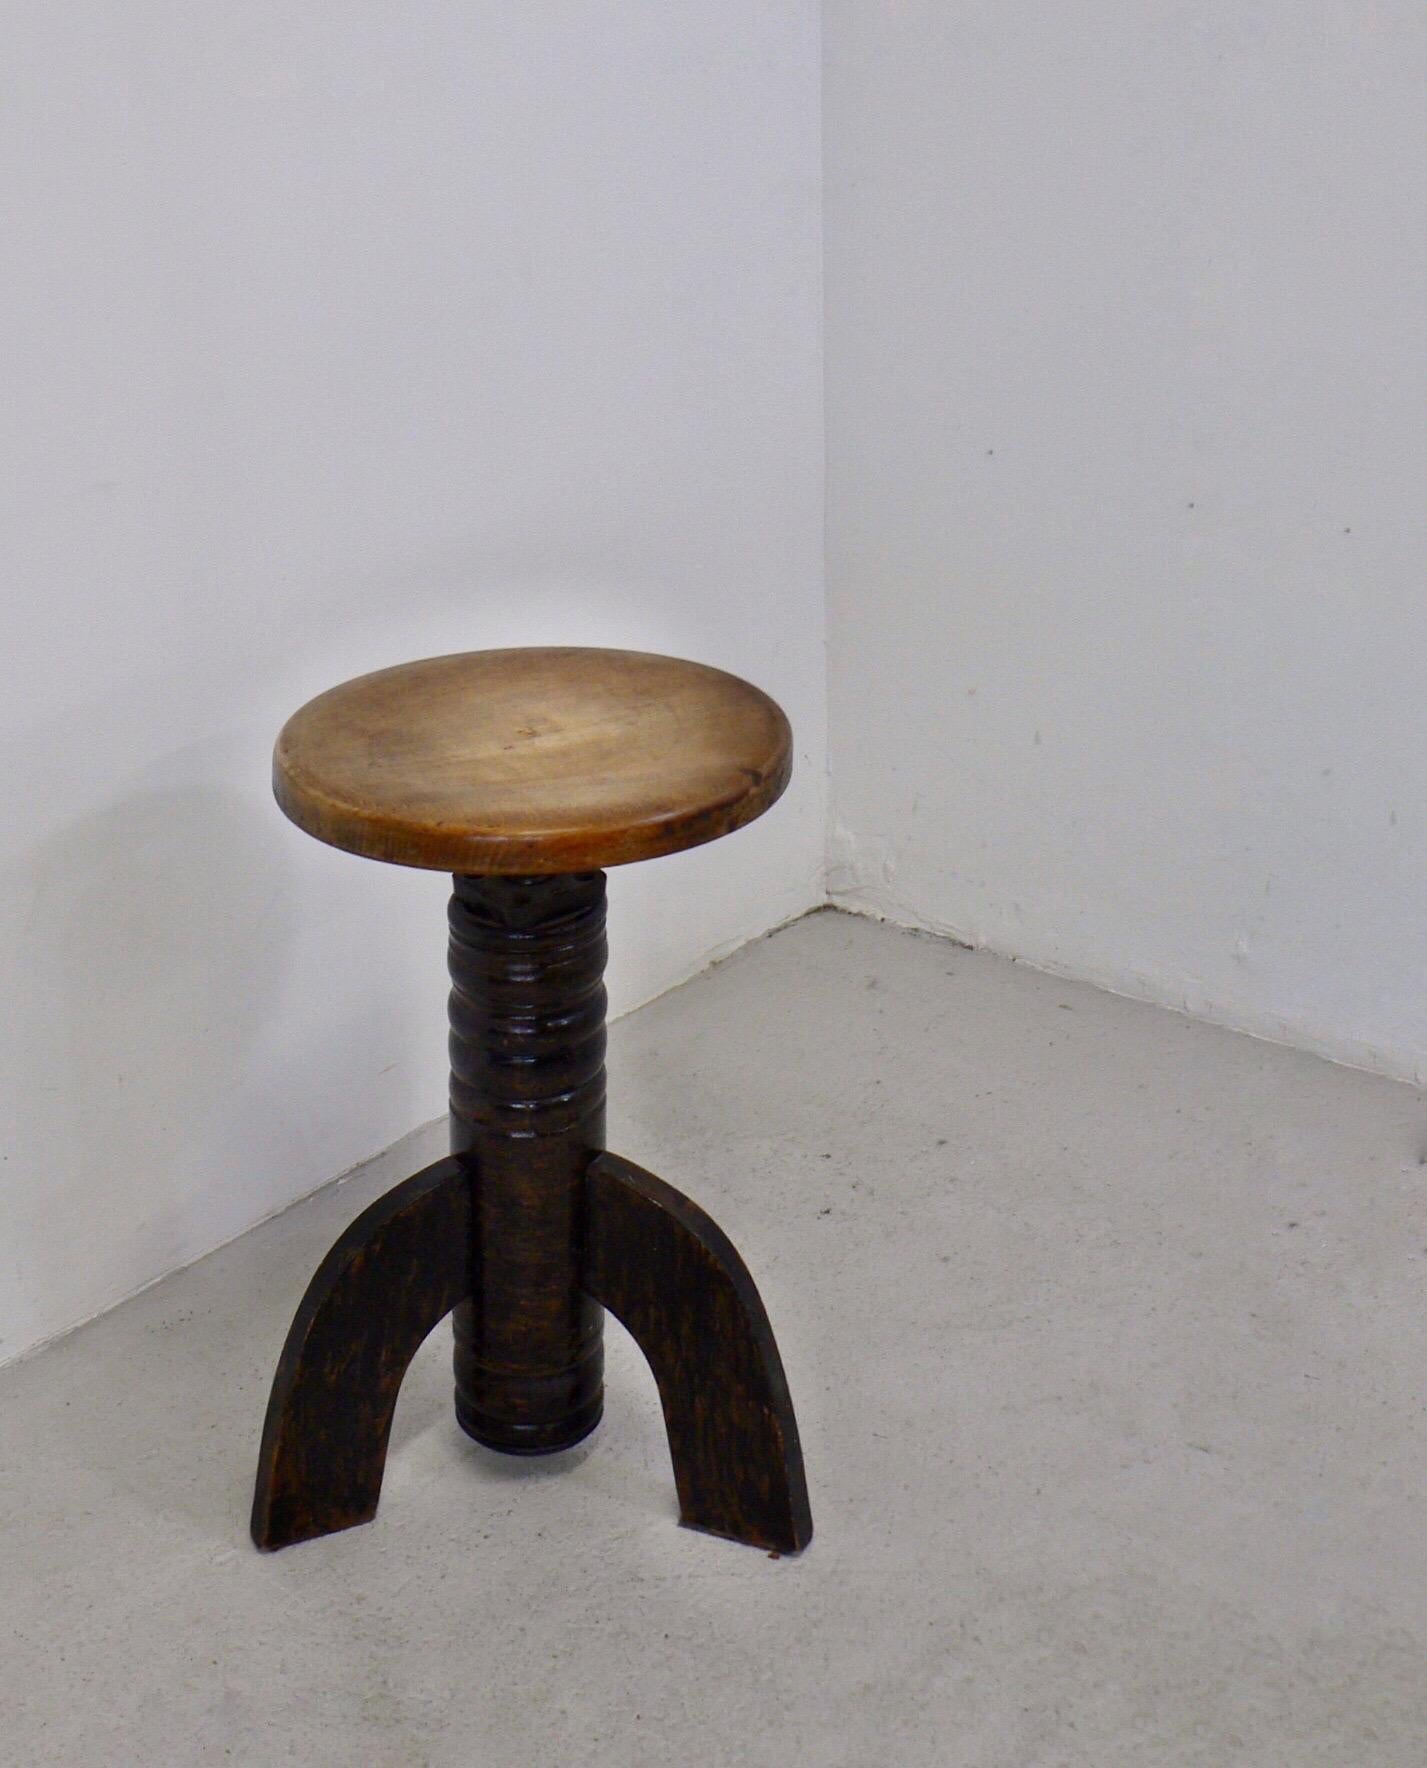 wiveling, height-adjustable, tripod stool from early 20th-century France. The tripod base is made of stained wood, and the seat is height-adjustable with a steel screw.